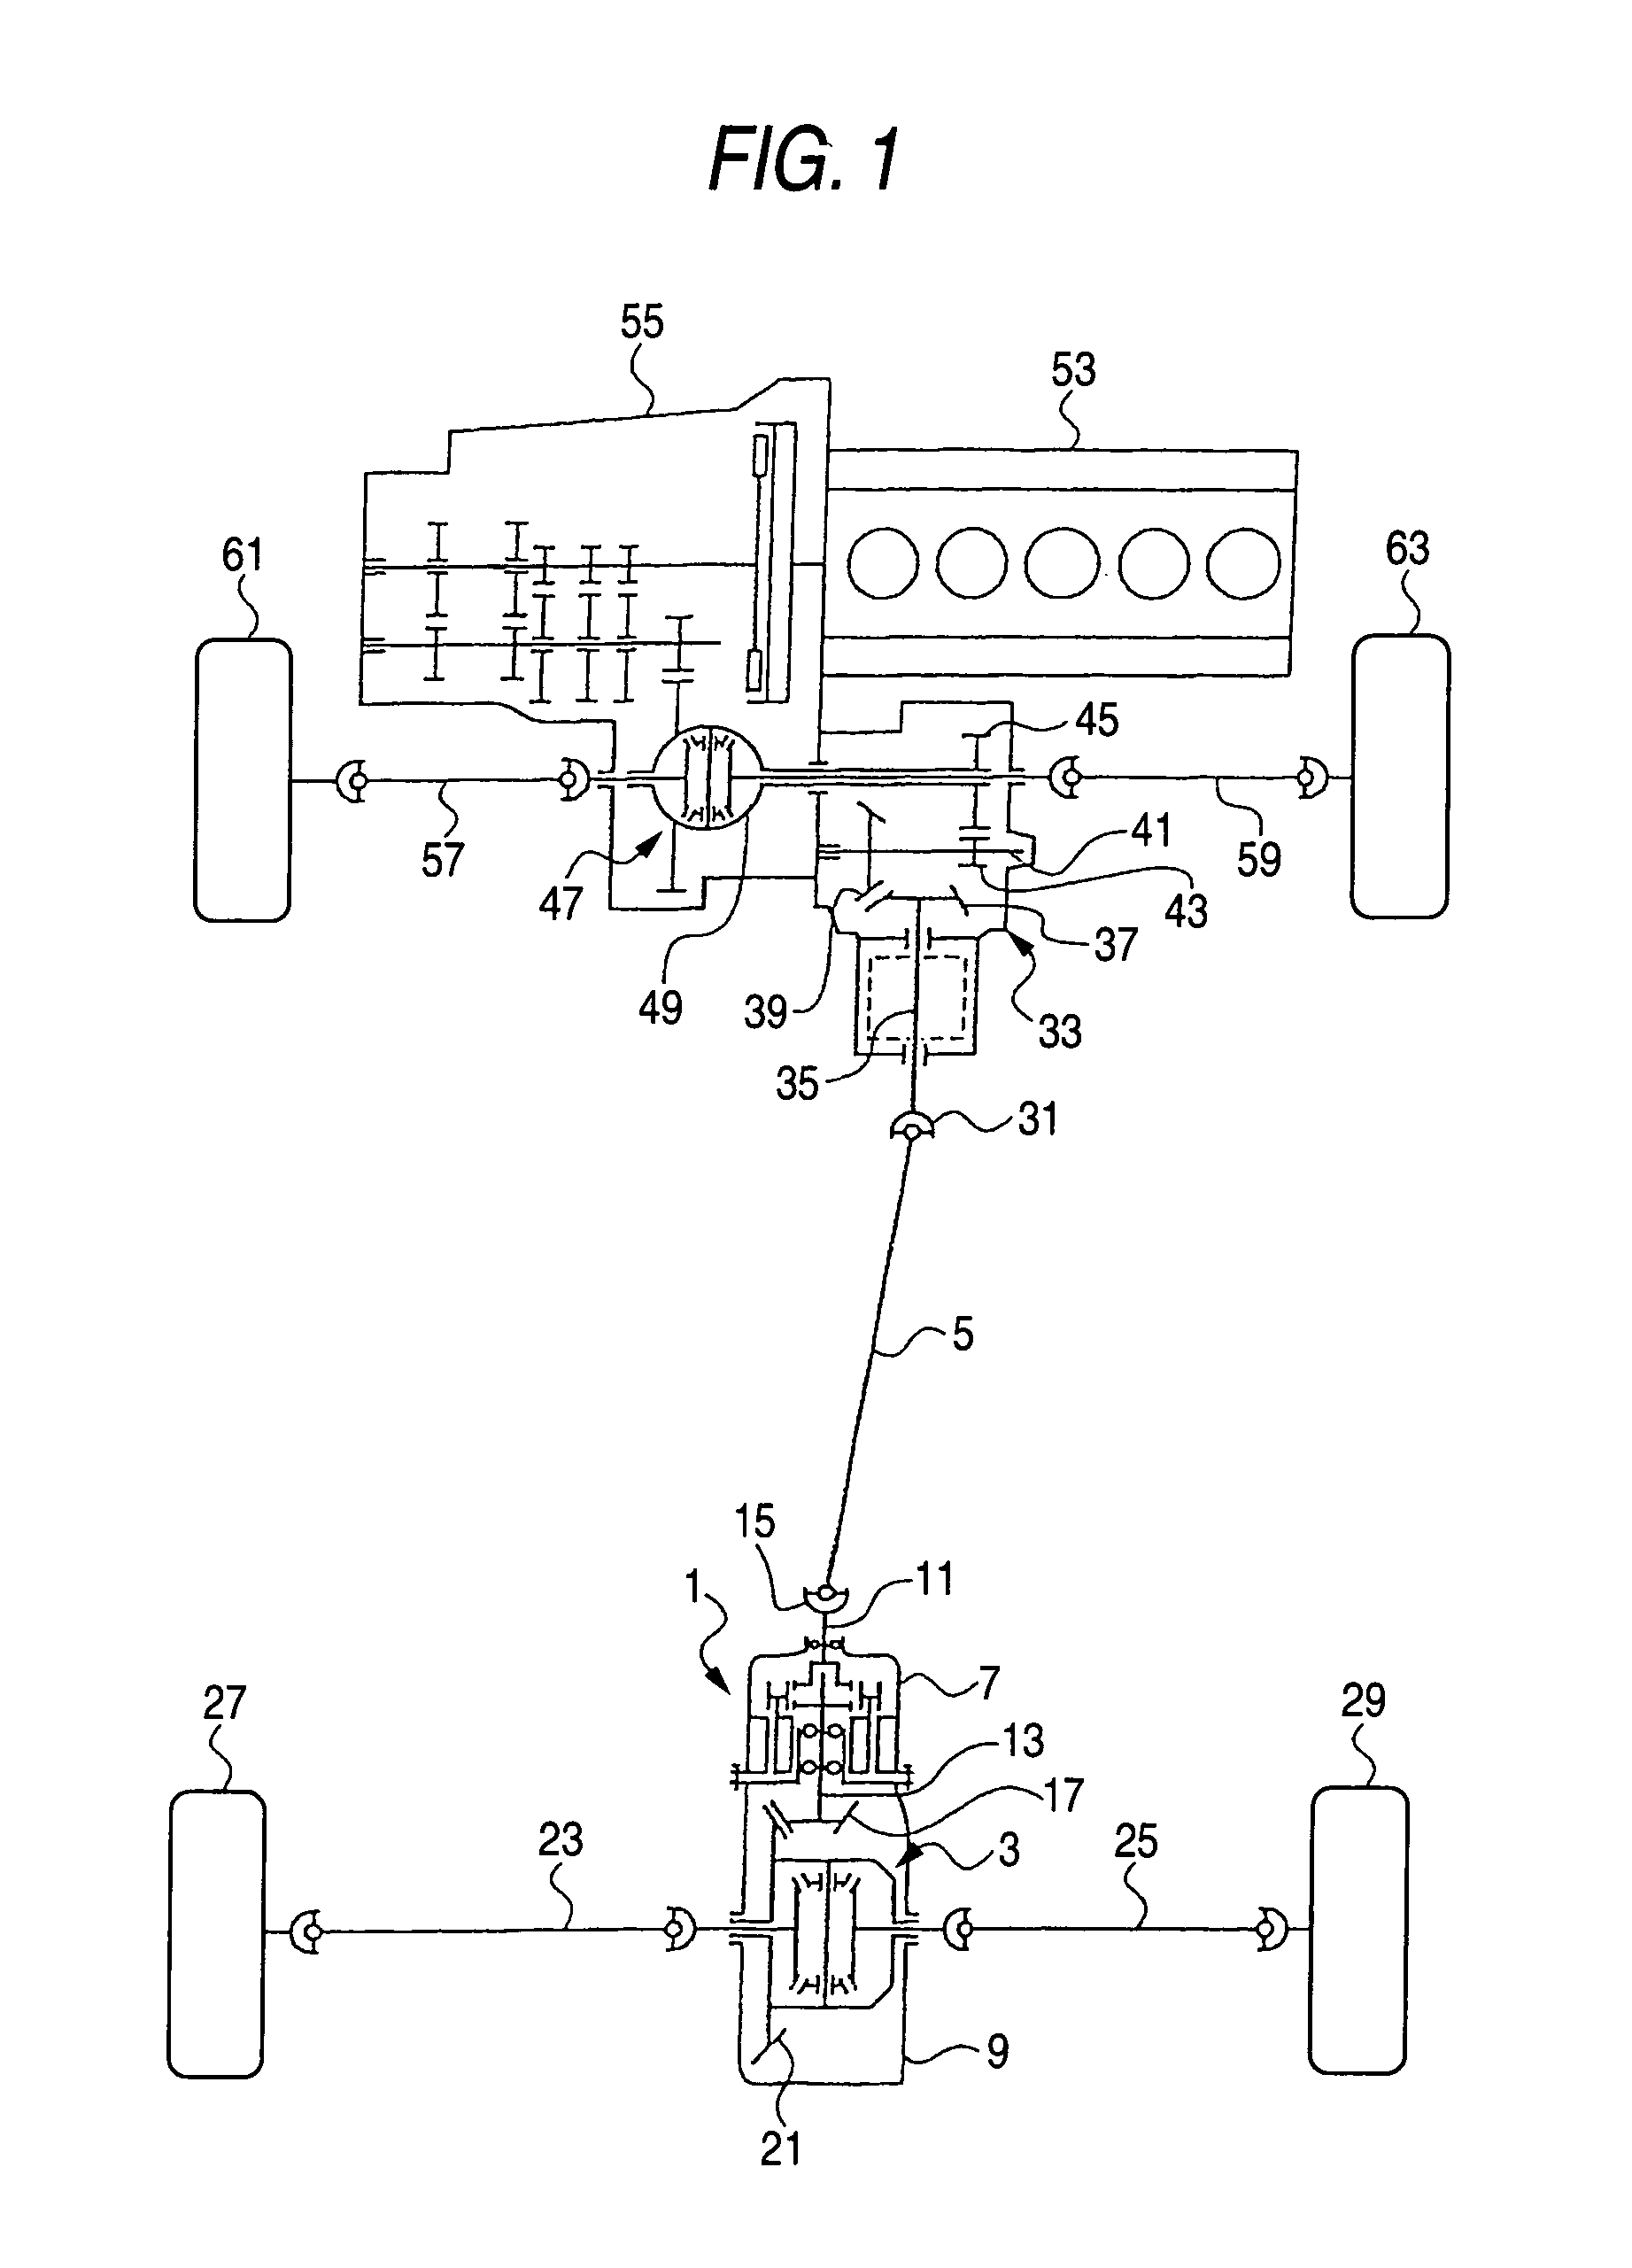 Rotatively driving apparatus